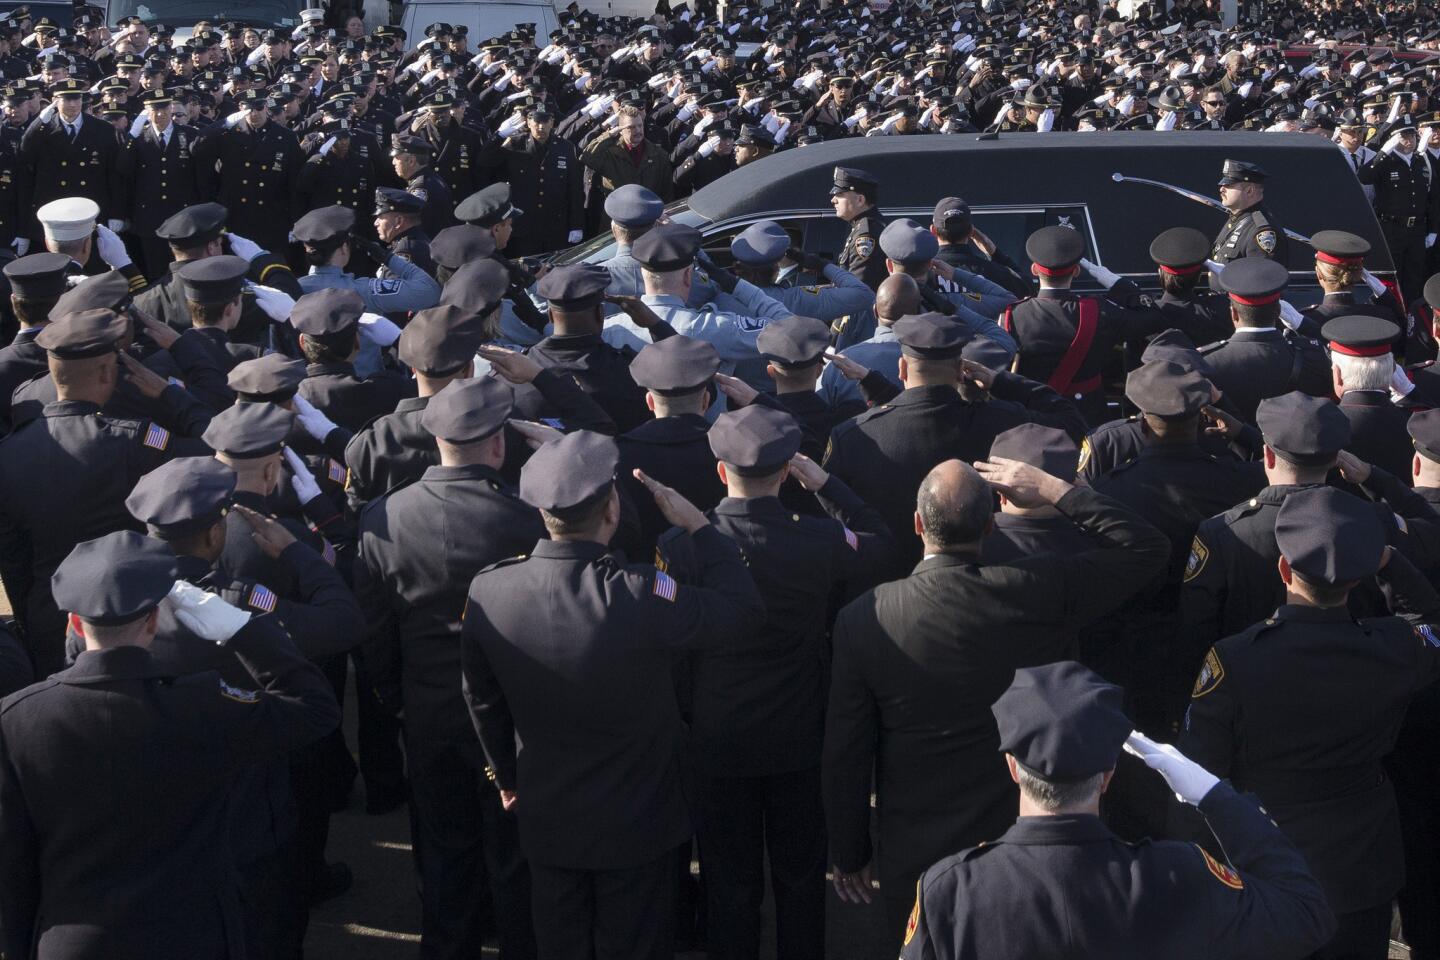 NYPD Officer Rafael Ramos' funeral